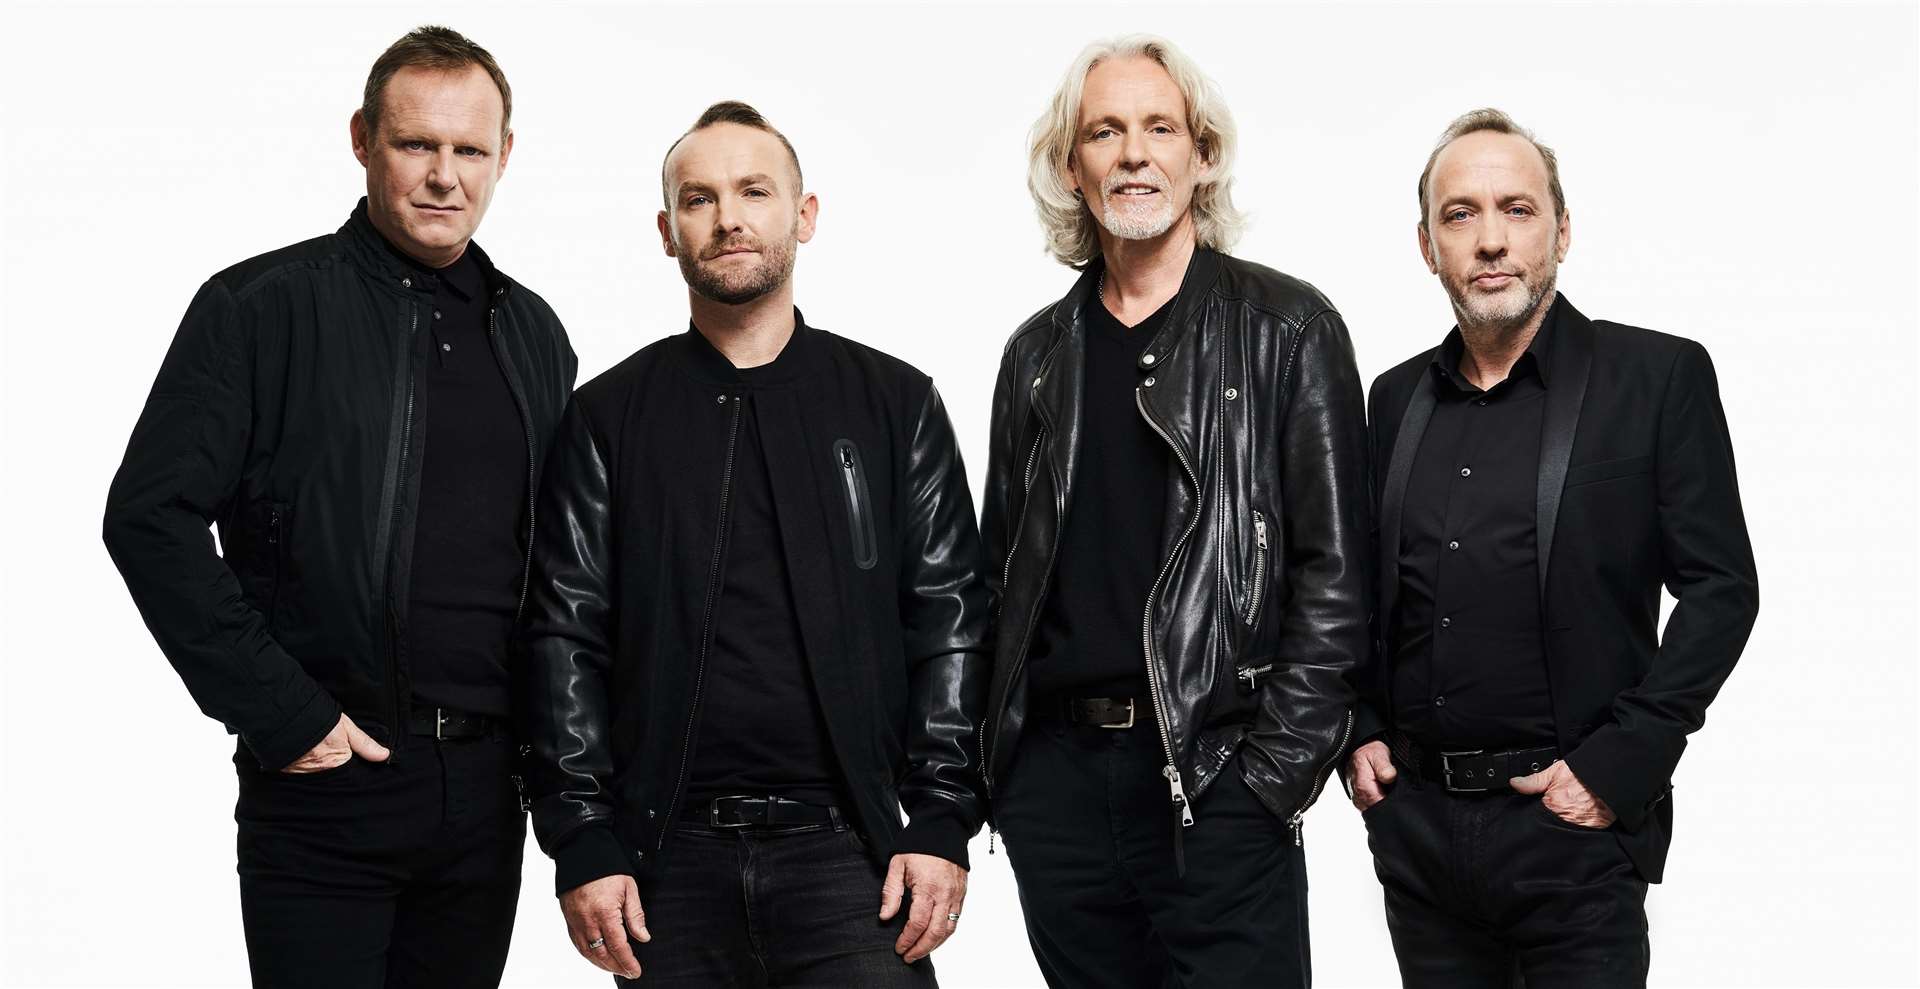 Wet Wet Wet will be at Let's Rock